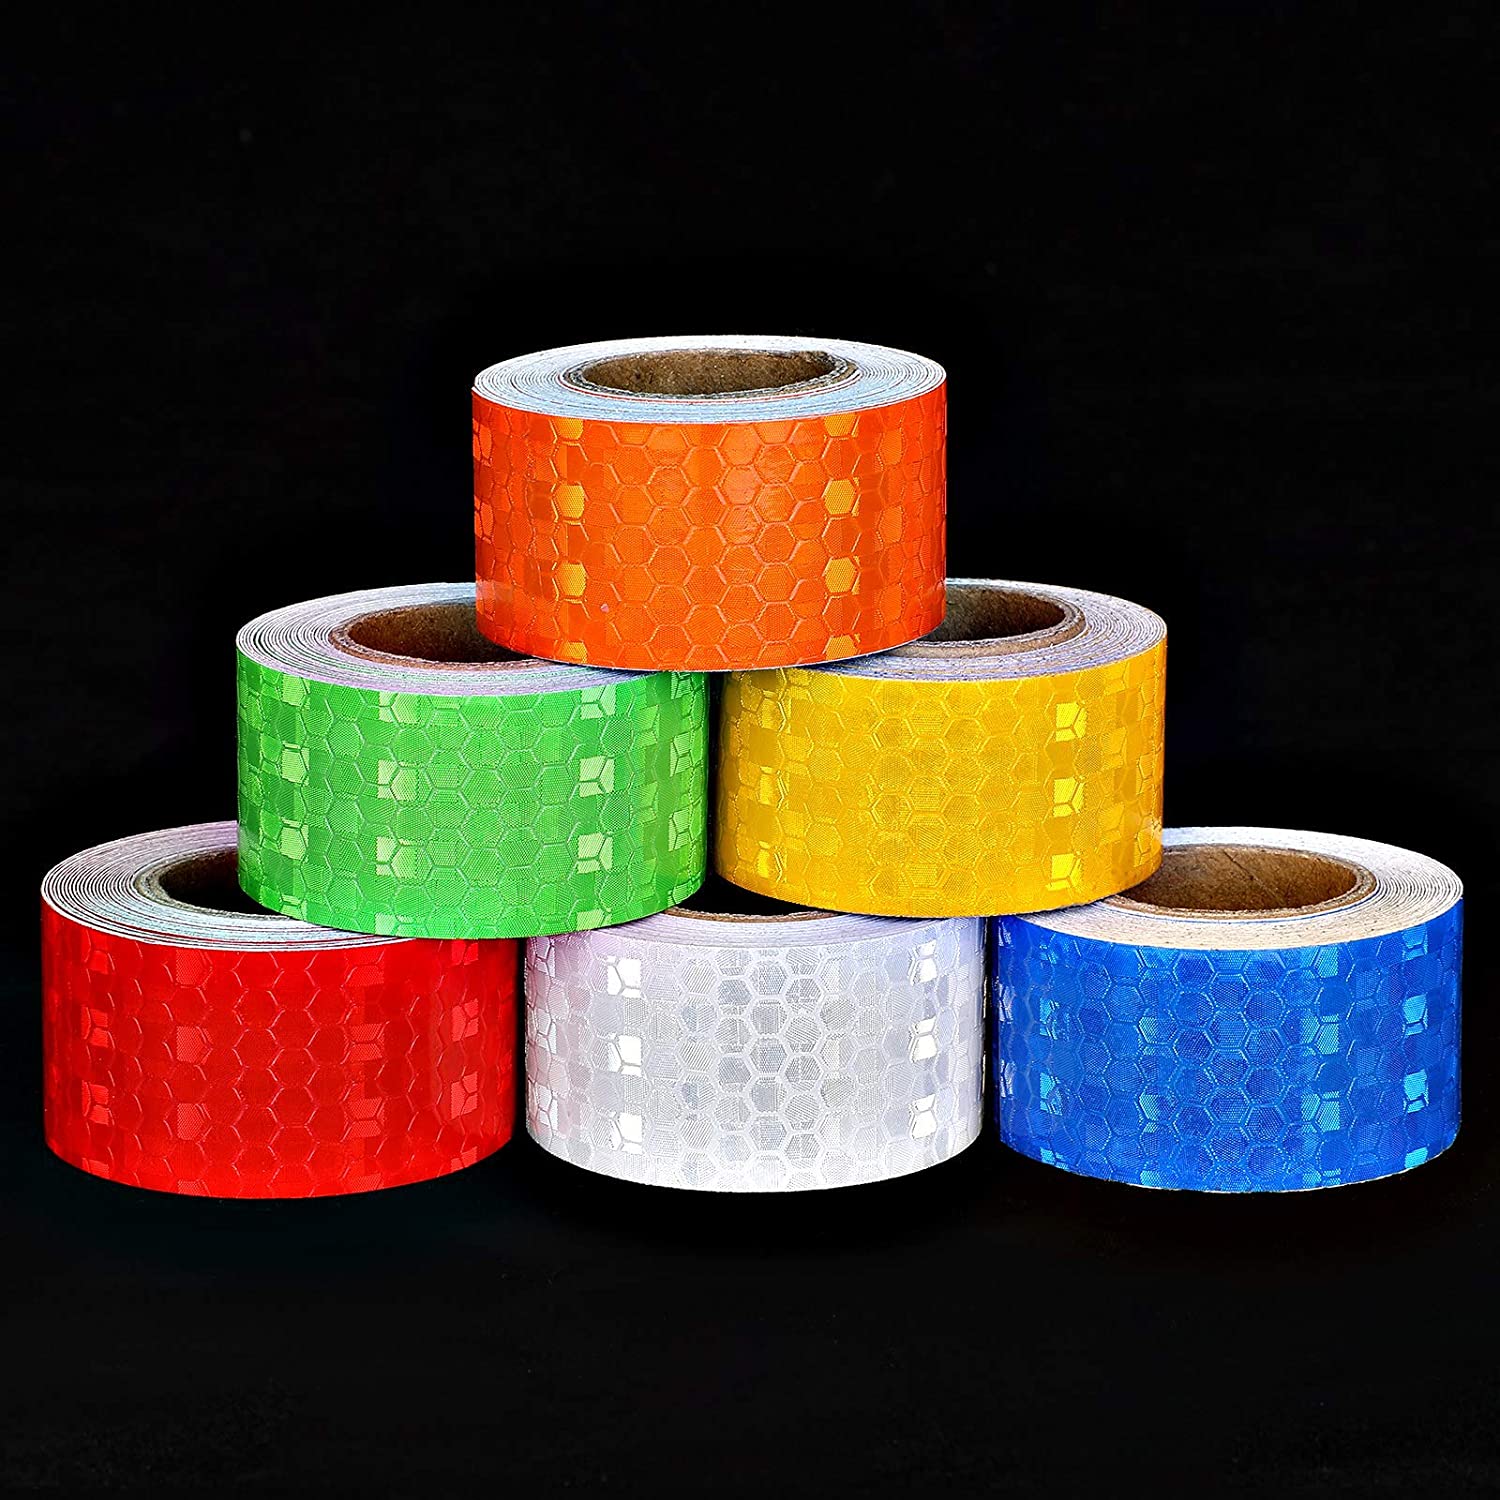 Colorful Glittering Retro-Reflective Tapes Warning Night Safety Stickers